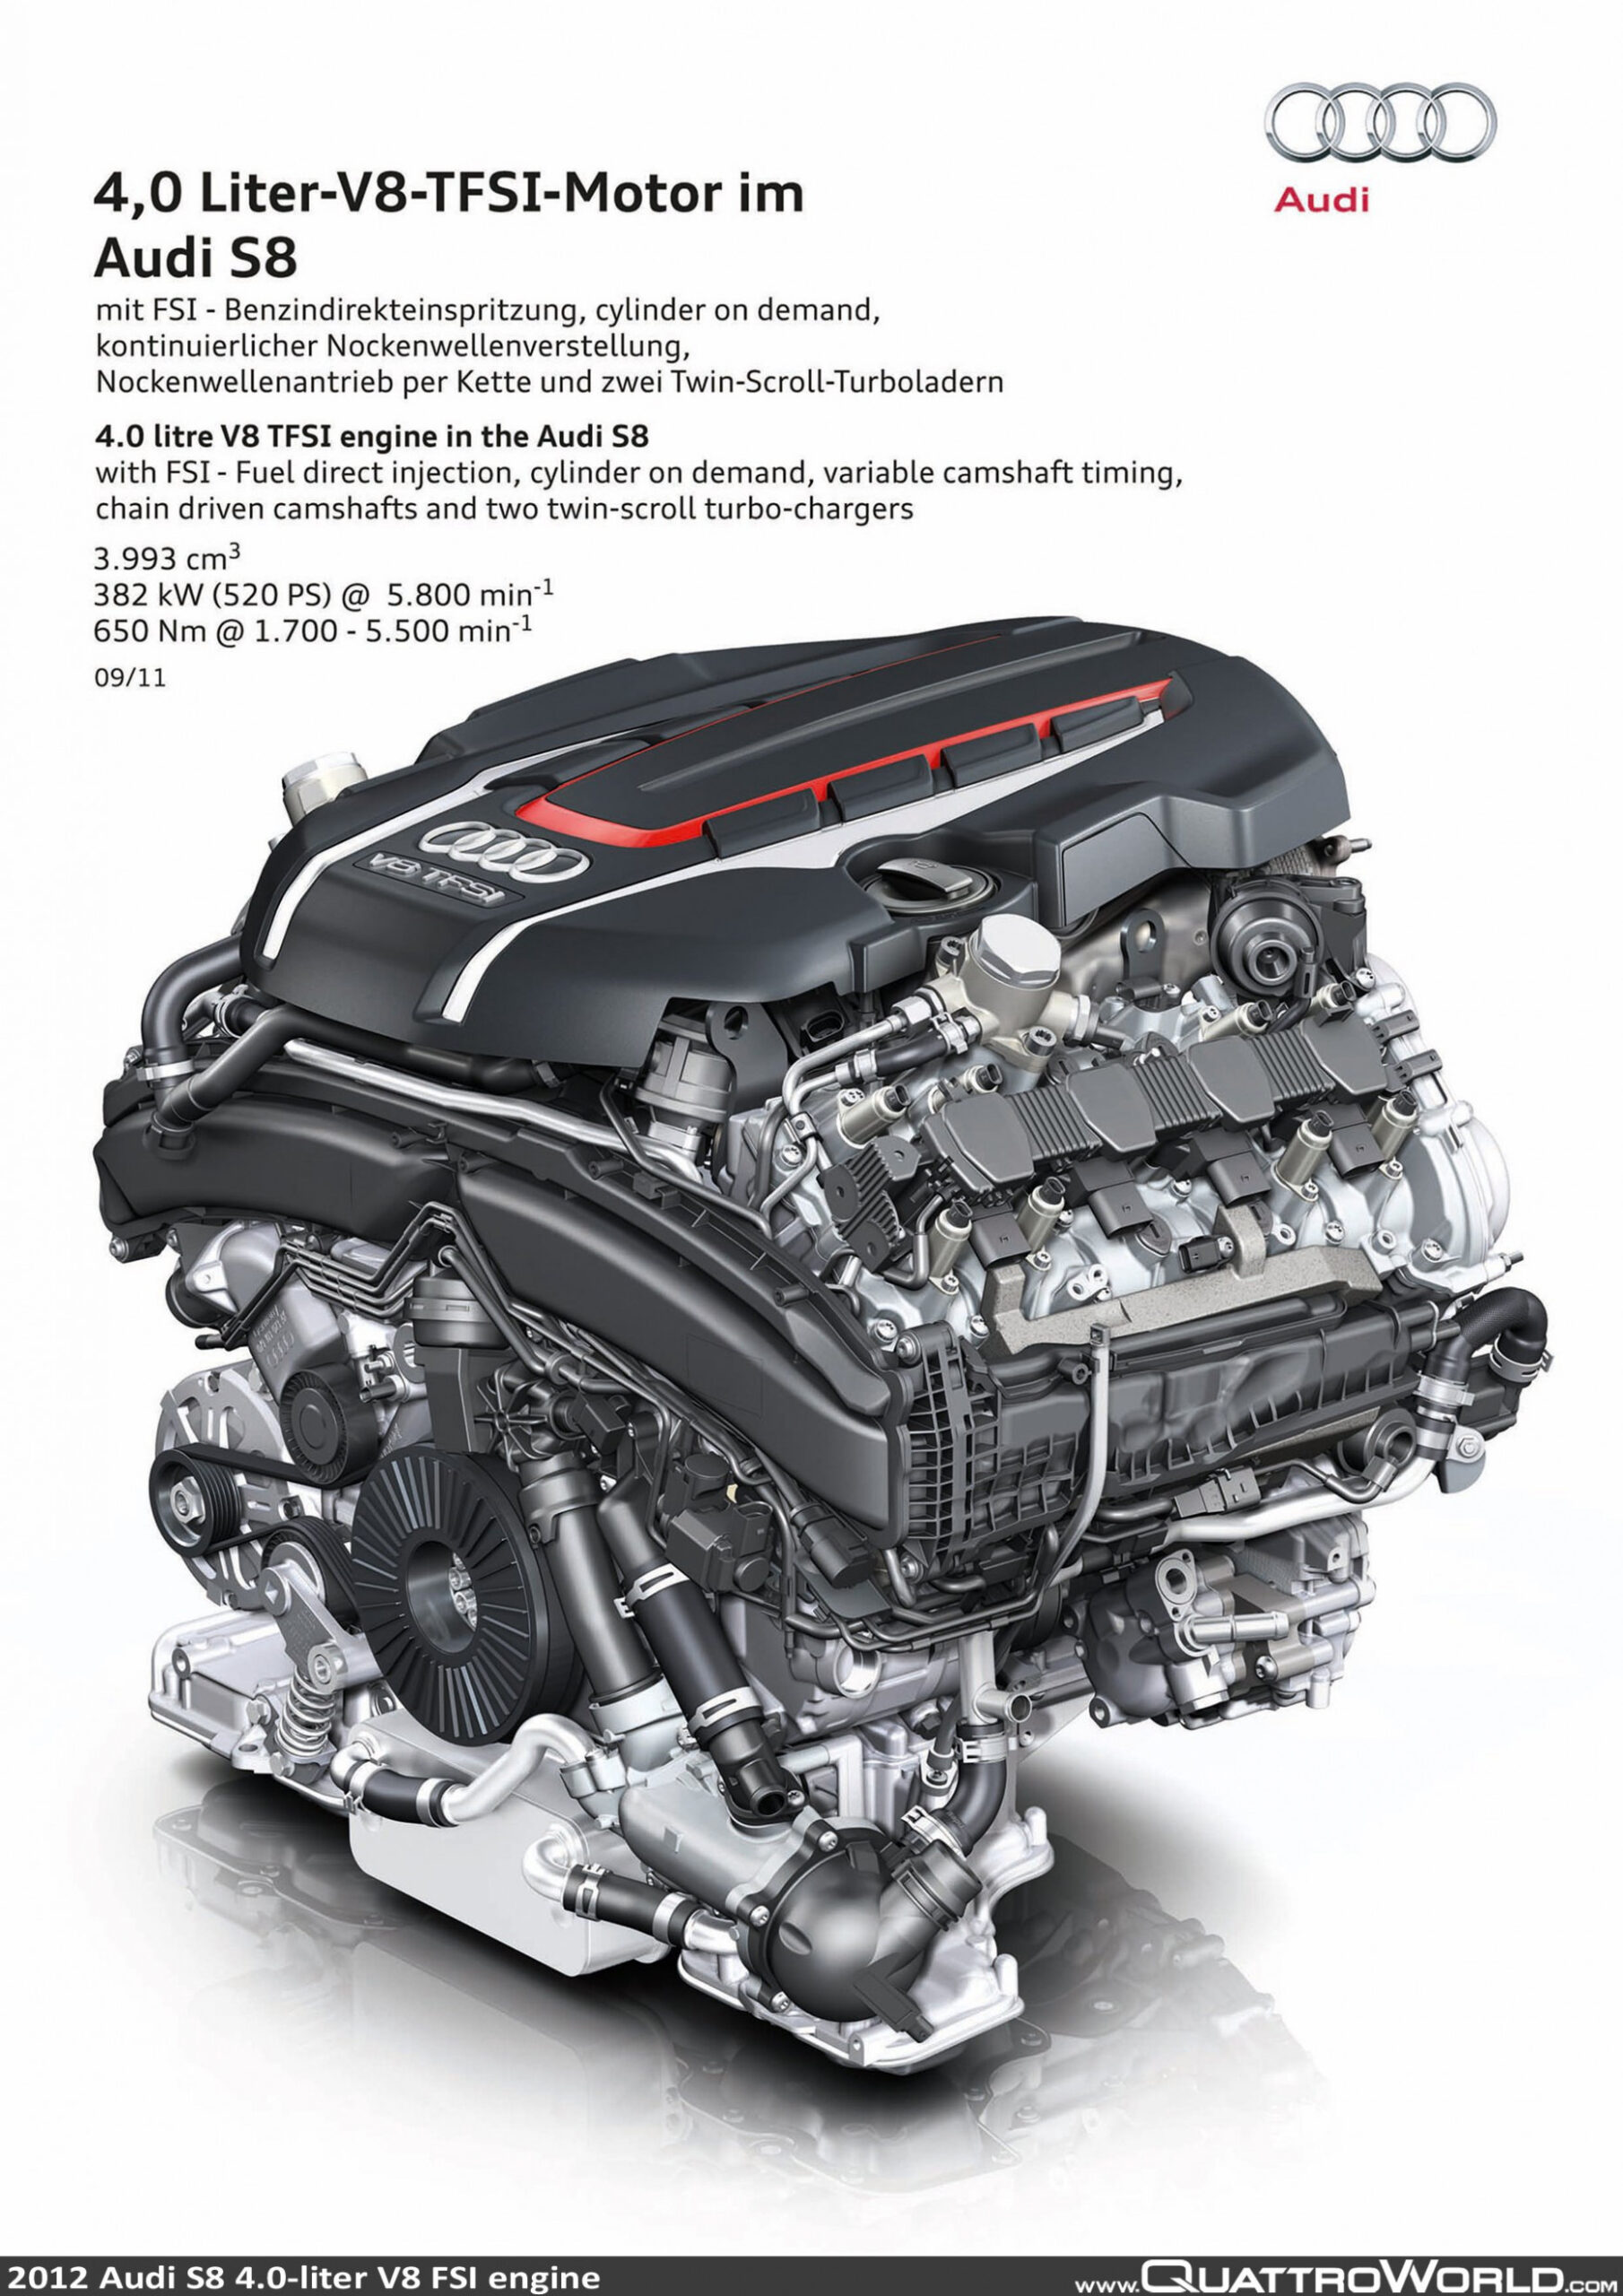 Redesign and Review audi 4.0 t engine